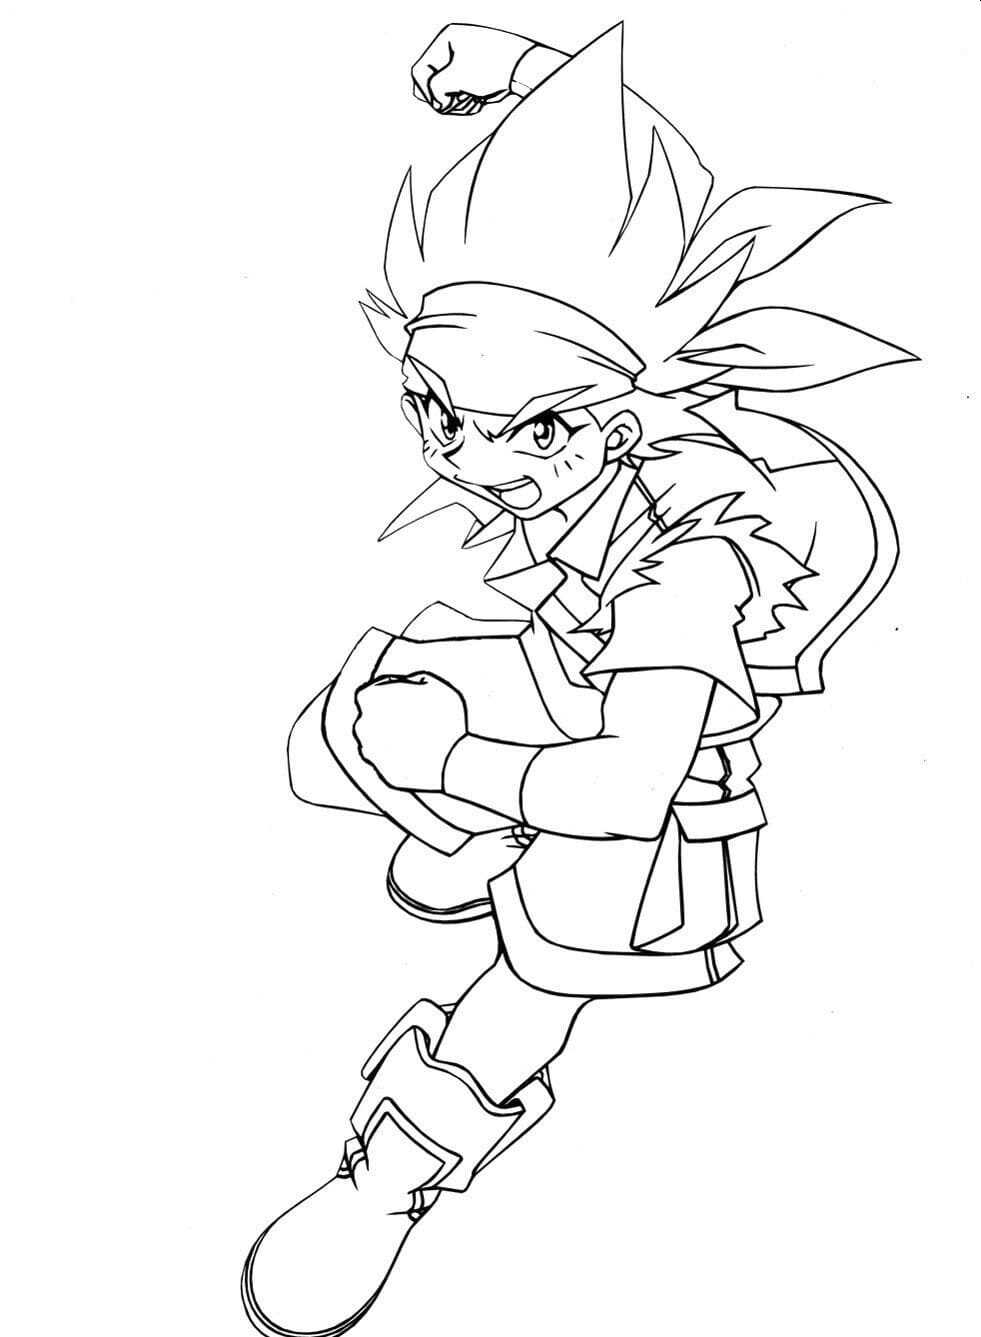 Blade With Child Idol Coloring Page